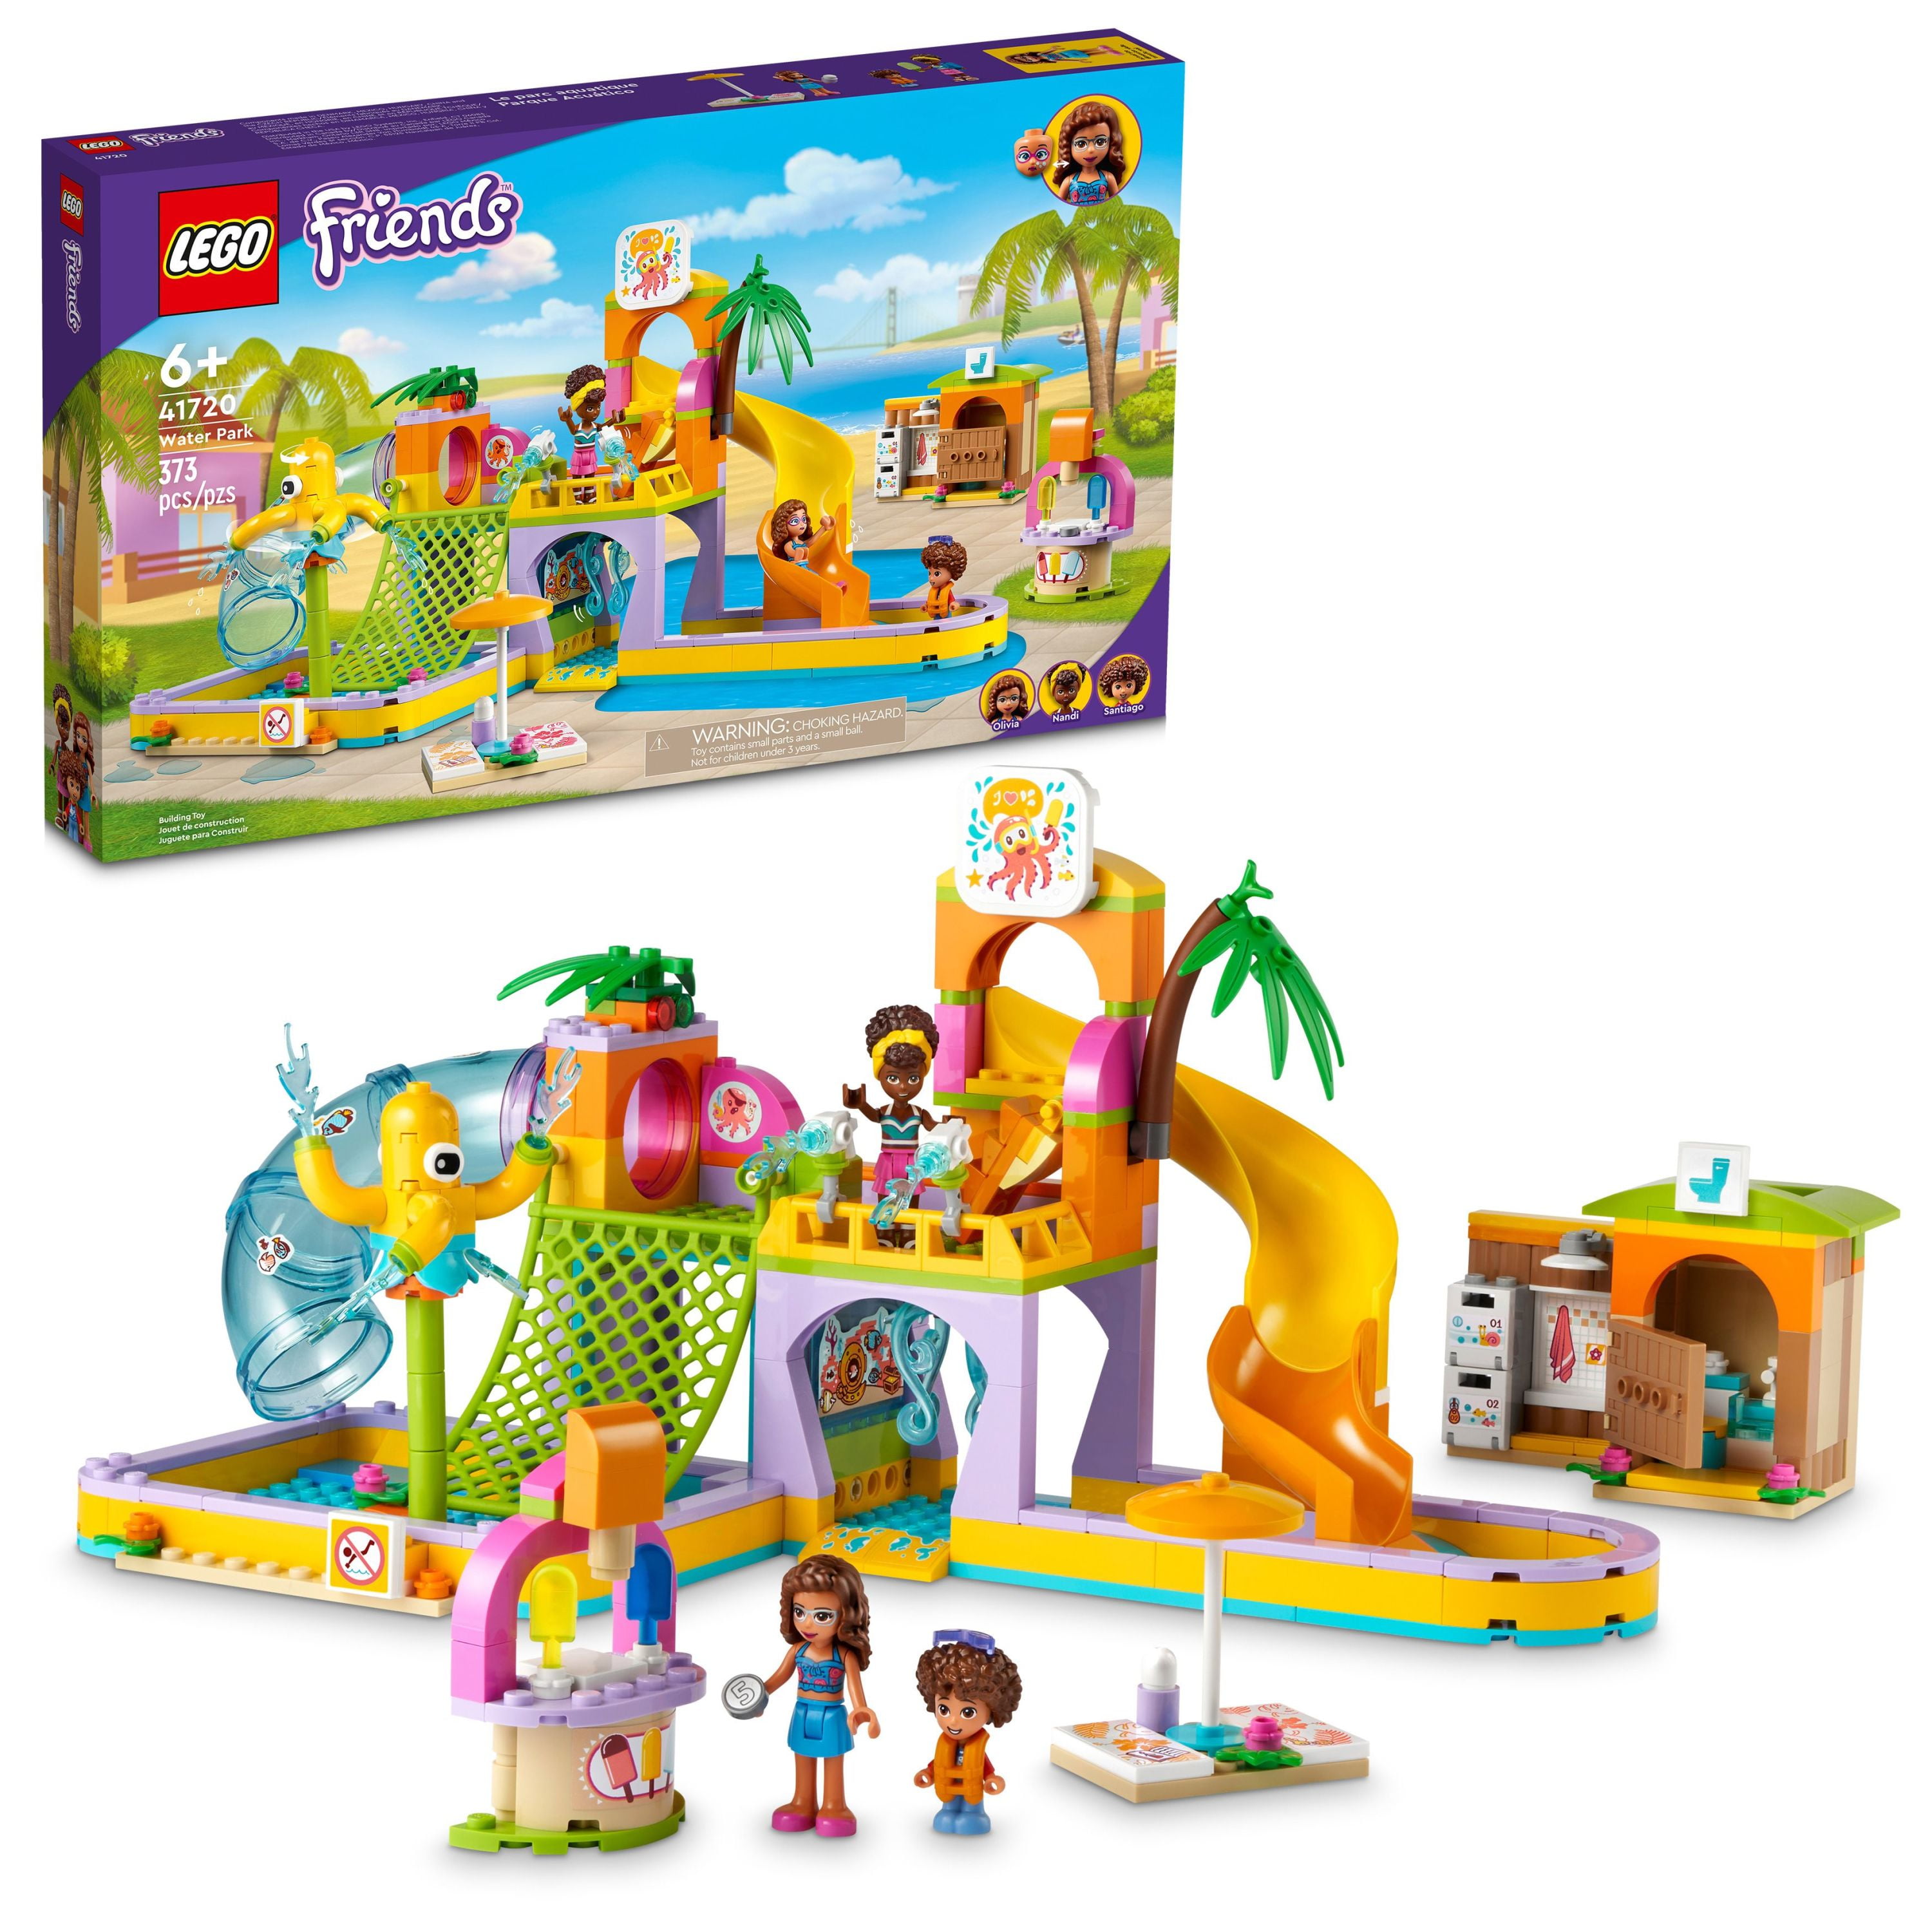 LEGO 41720 Friends Water Park Set 41720 Swimming Pool and Slides, Heartlake City Summer Toy for Kids Aged 6 Plus, Birthday Gift Idea